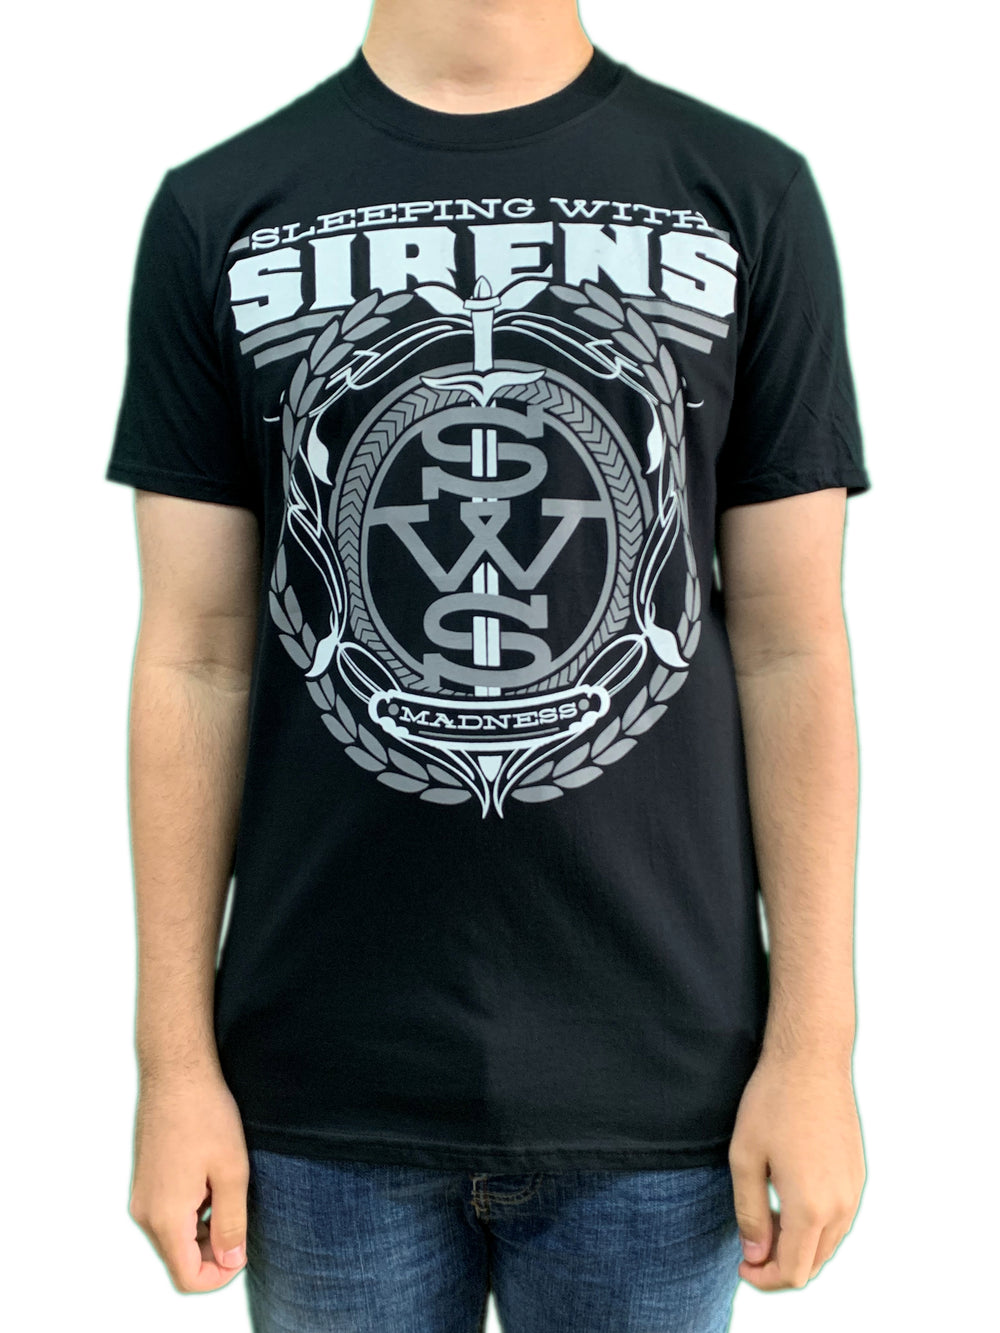 Sleeping With Sirens Crest Unisex Official T Shirt Brand New Various Sizes